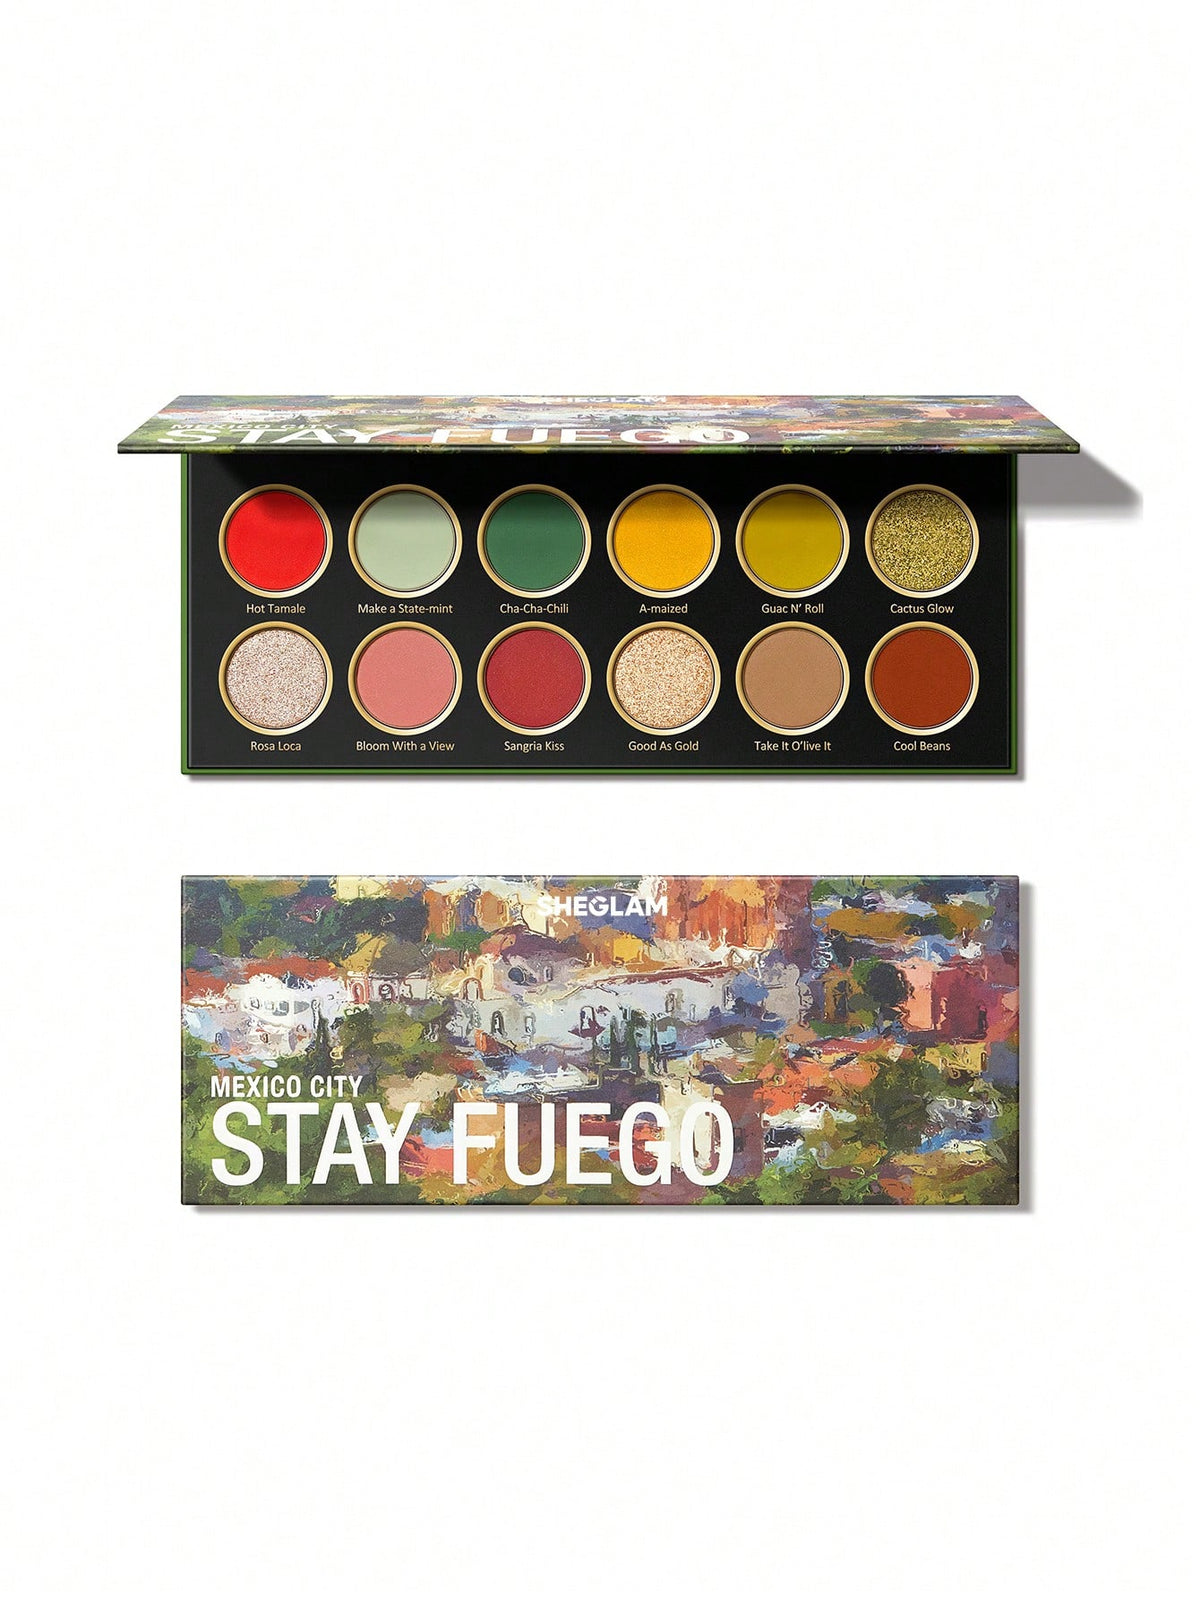 SHEGLAM Stay Fuego, Mexico Palette 12-Clolor Shimmer Metallic Matte Eyeshadow Palette Green Gilding Shimmer Highly Pigmented Colors Long Lasting  No Smudge Durable Long Wear Eyeshadow Eye Makeup Cosmetics Black Friday Winter Goth Eyeshadow